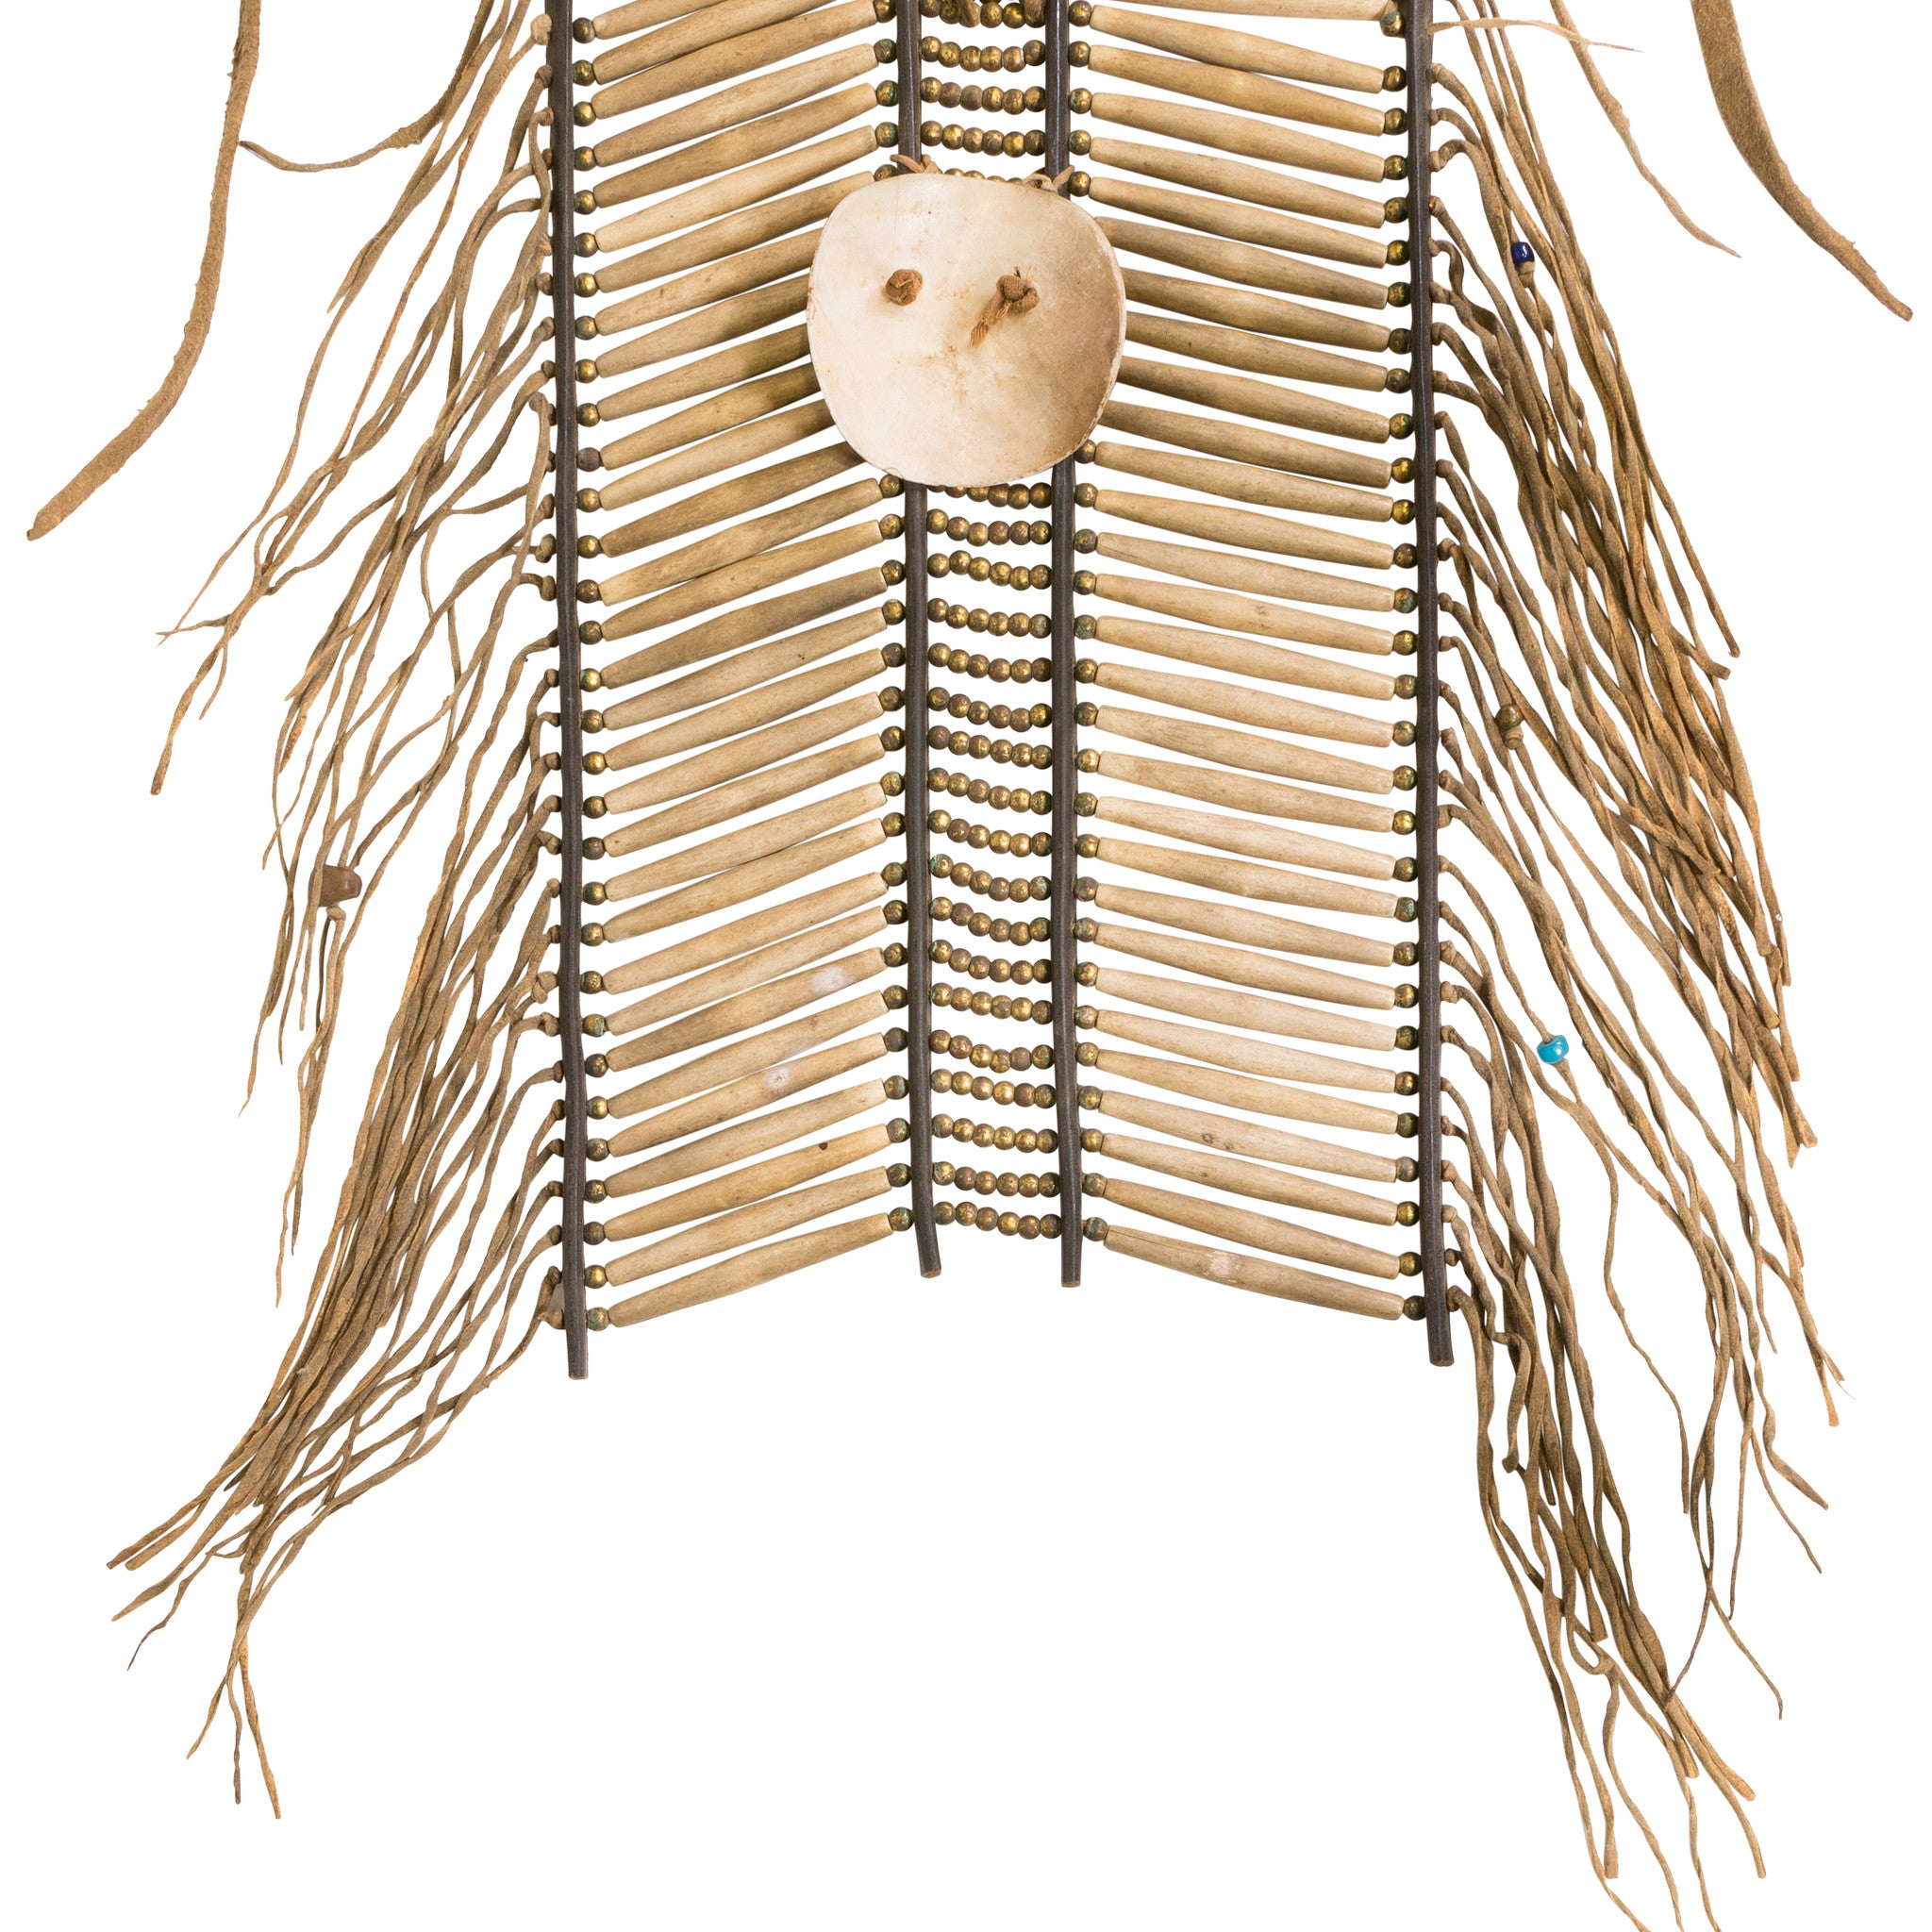 Northern Plains Breastplate